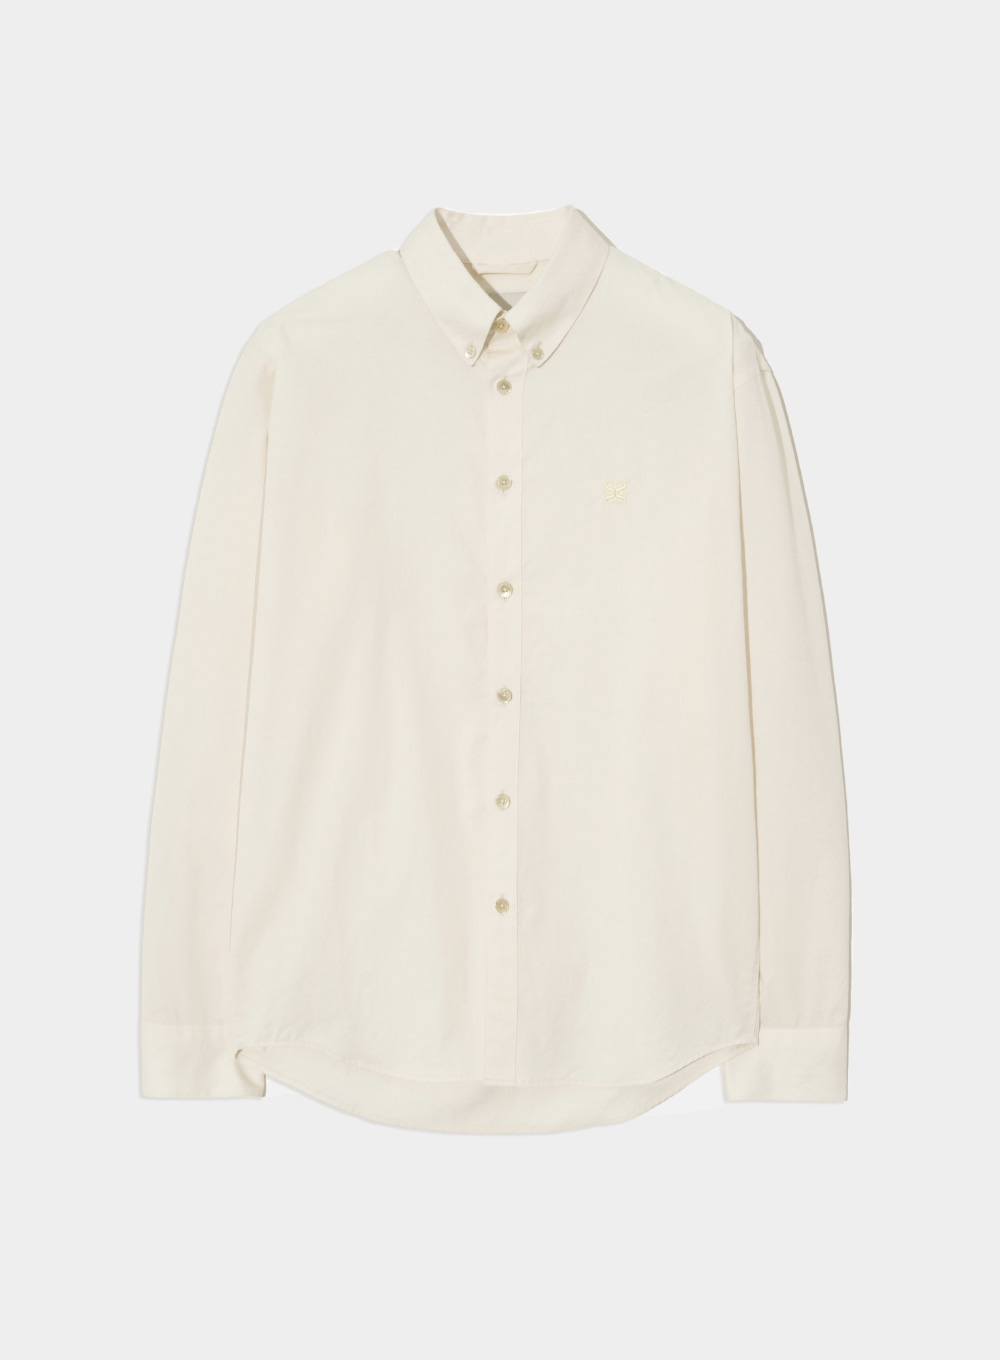 Satur All Day Soft Basic Shirts - Yellow Ivory